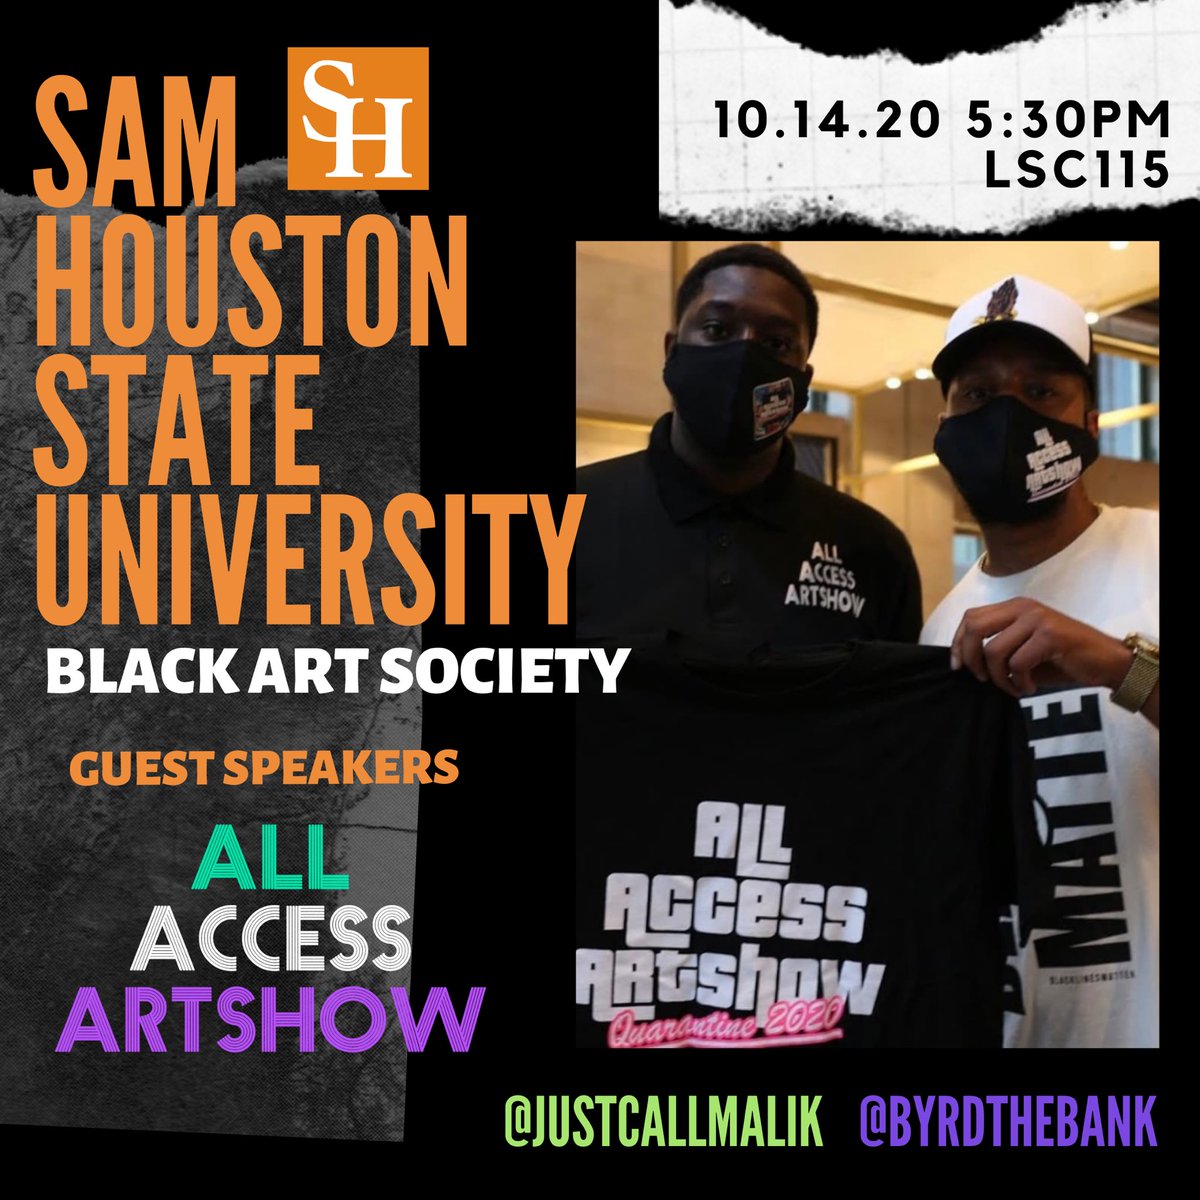 Blessed to be speaking to the @blackart_shsu at #SHSU today at 5:30pm CST (LSC115) discussing how artists can Tap-In to the Art Industry after college. Dropping some gems about about the importance of branding yourself + aligning with industry leaders to improve your success.